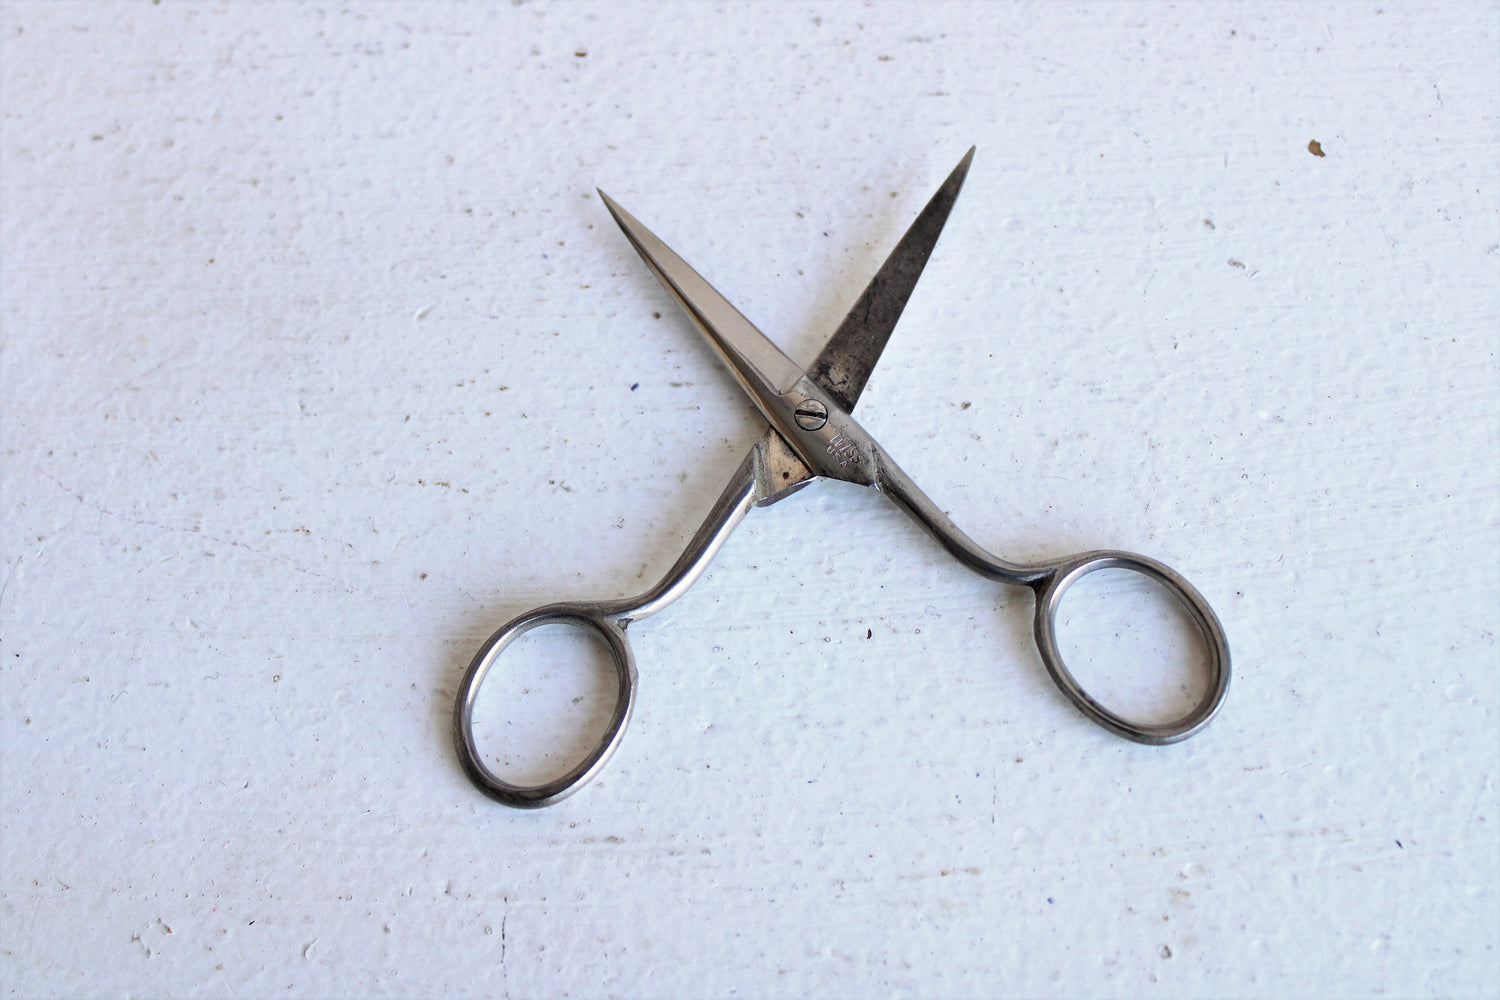 Vintage Wiss 764 Embroidery or Sewing Scissors